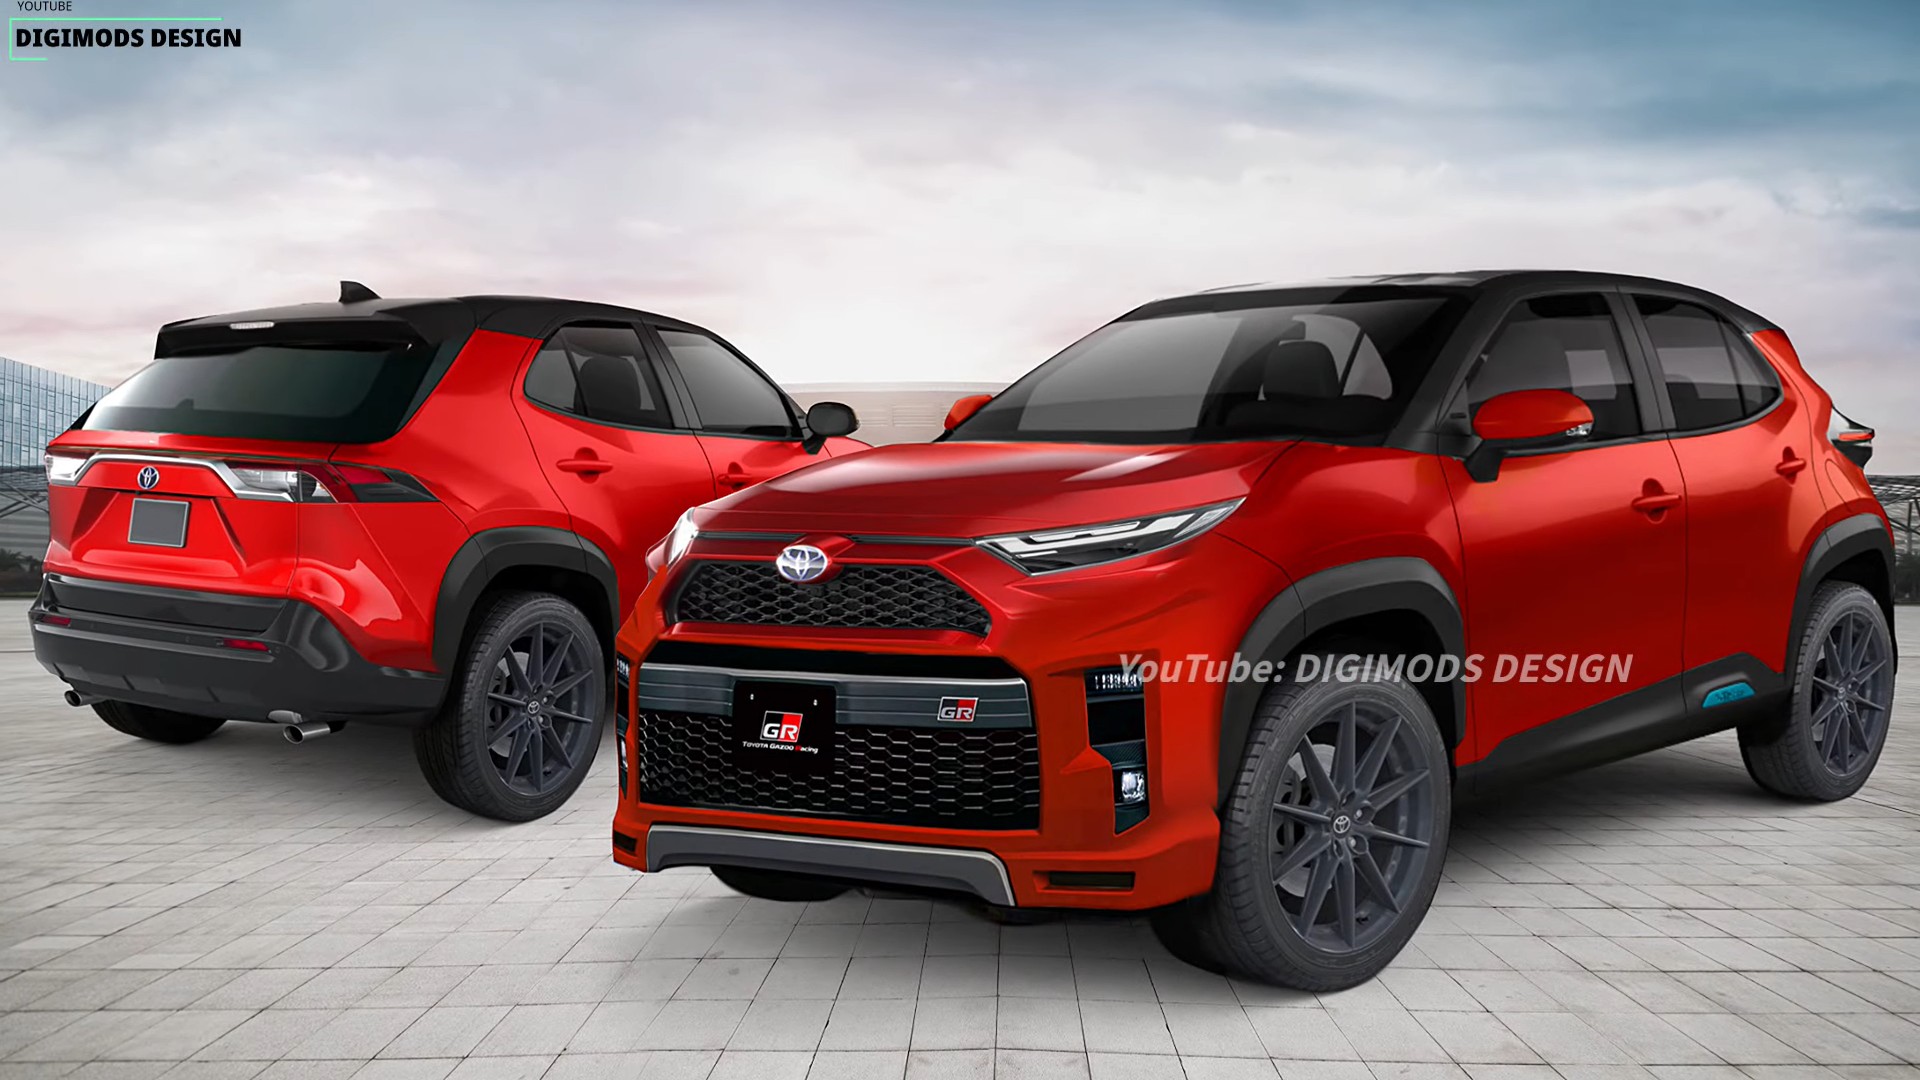 https://s1.cdn.autoevolution.com/images/news/should-toyota-build-a-gr-yaris-cross-sporty-cuv-and-could-it-look-like-this-please-215124_1.jpg